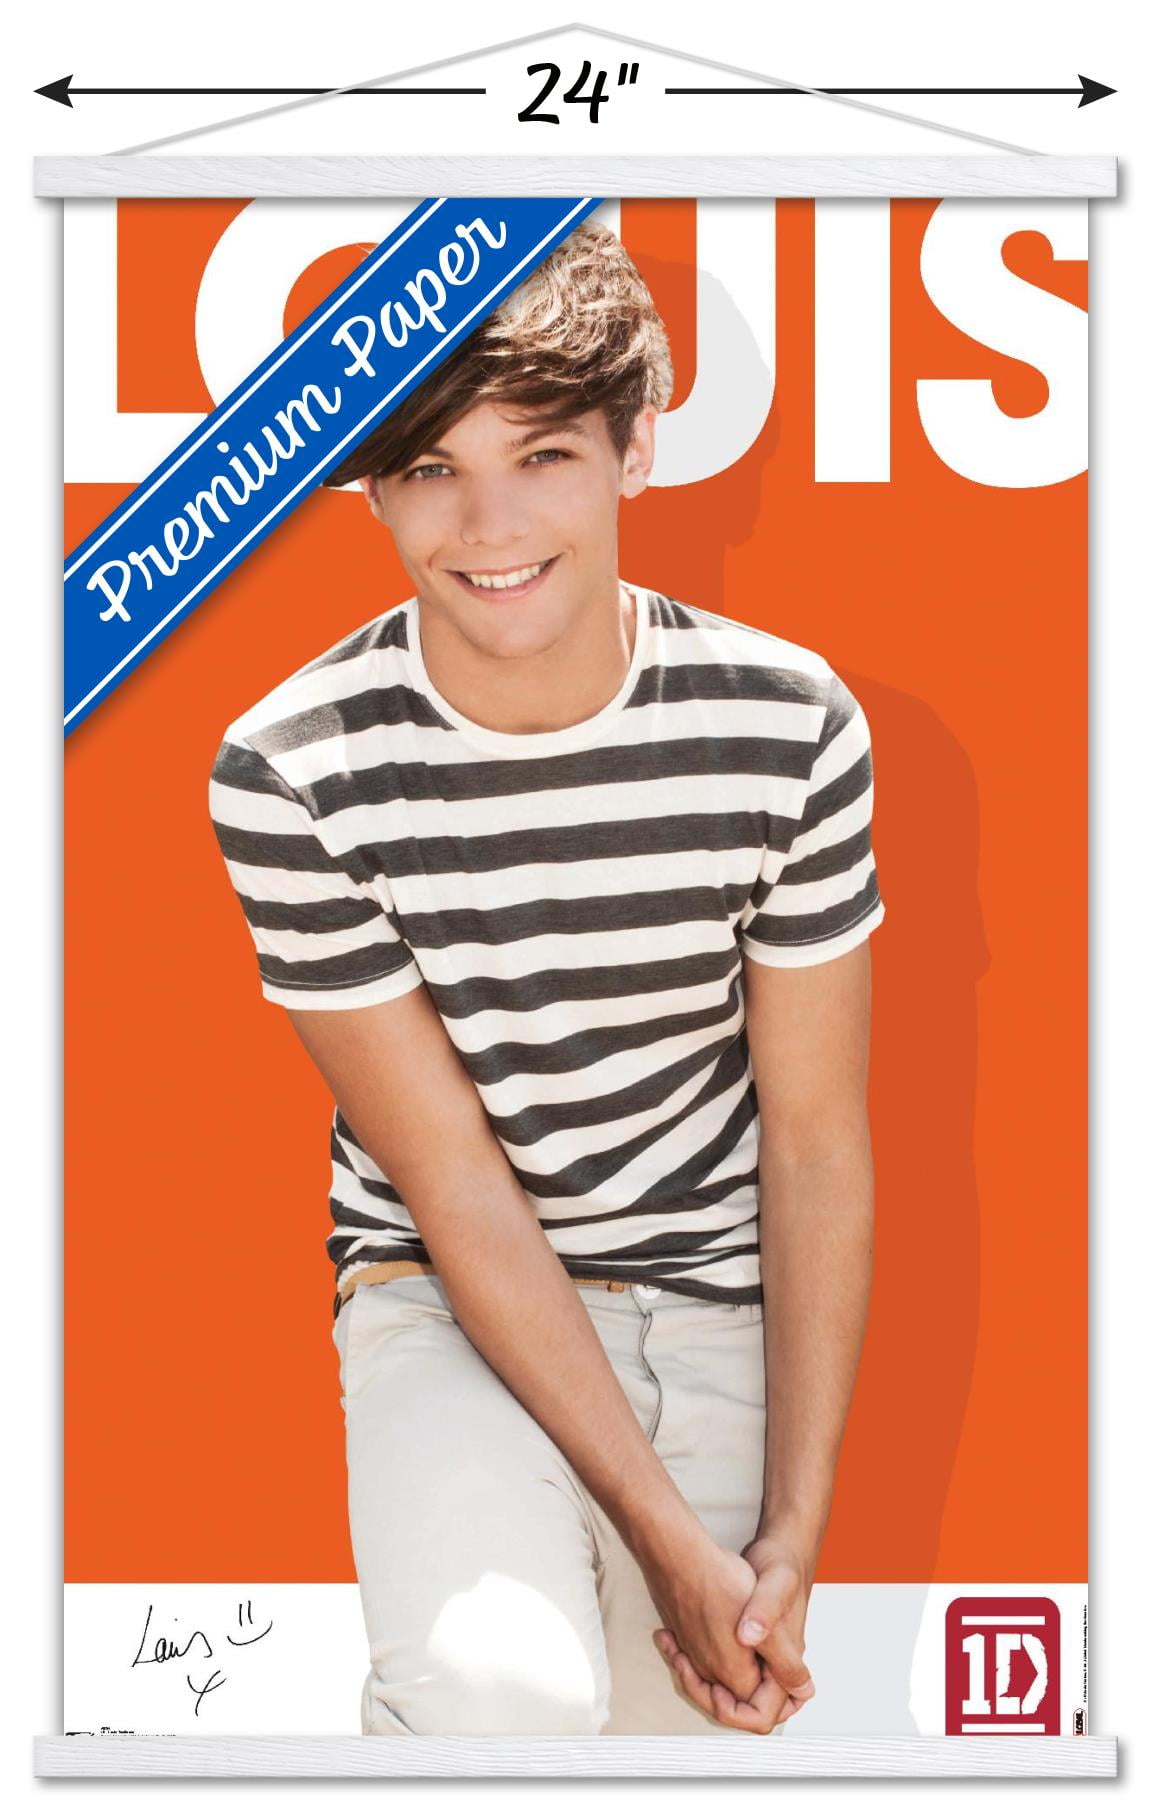 Louis Tomlinson 'Shredded' Poster – Posters Plug